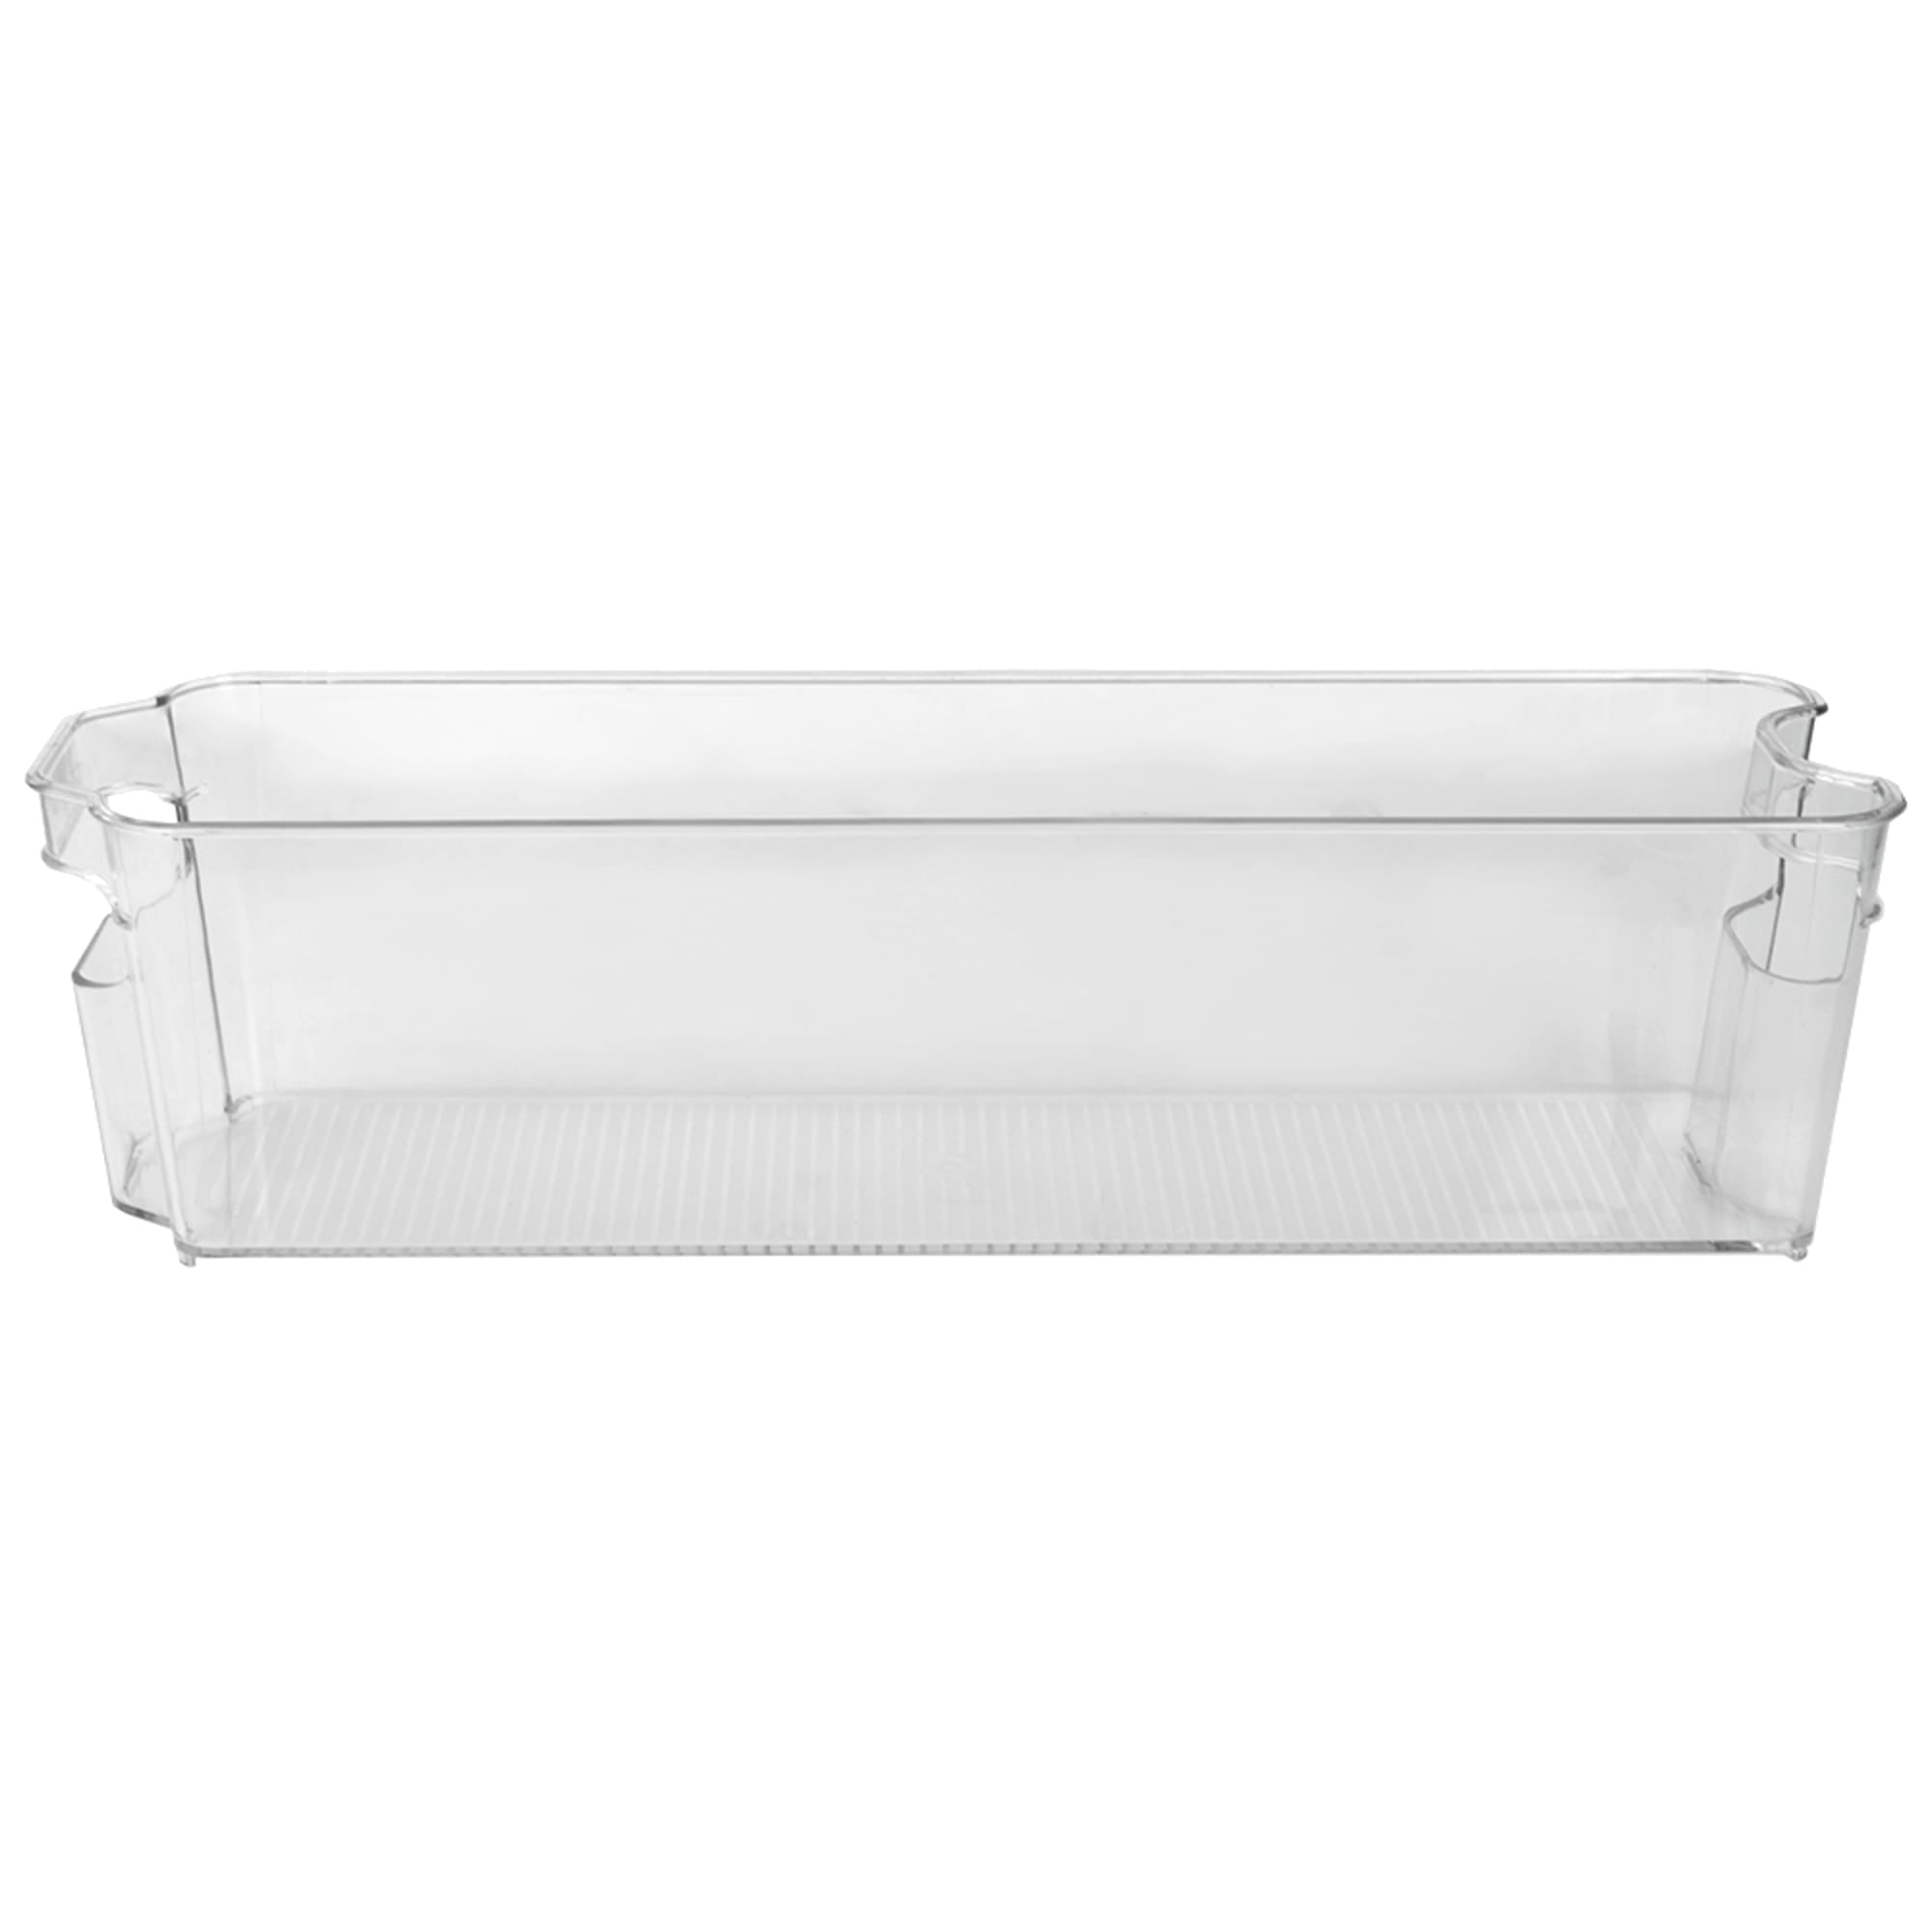 Home Basics Small Plastic Fridge Bin with Handle, Clear $3.00 EACH, CASE PACK OF 12